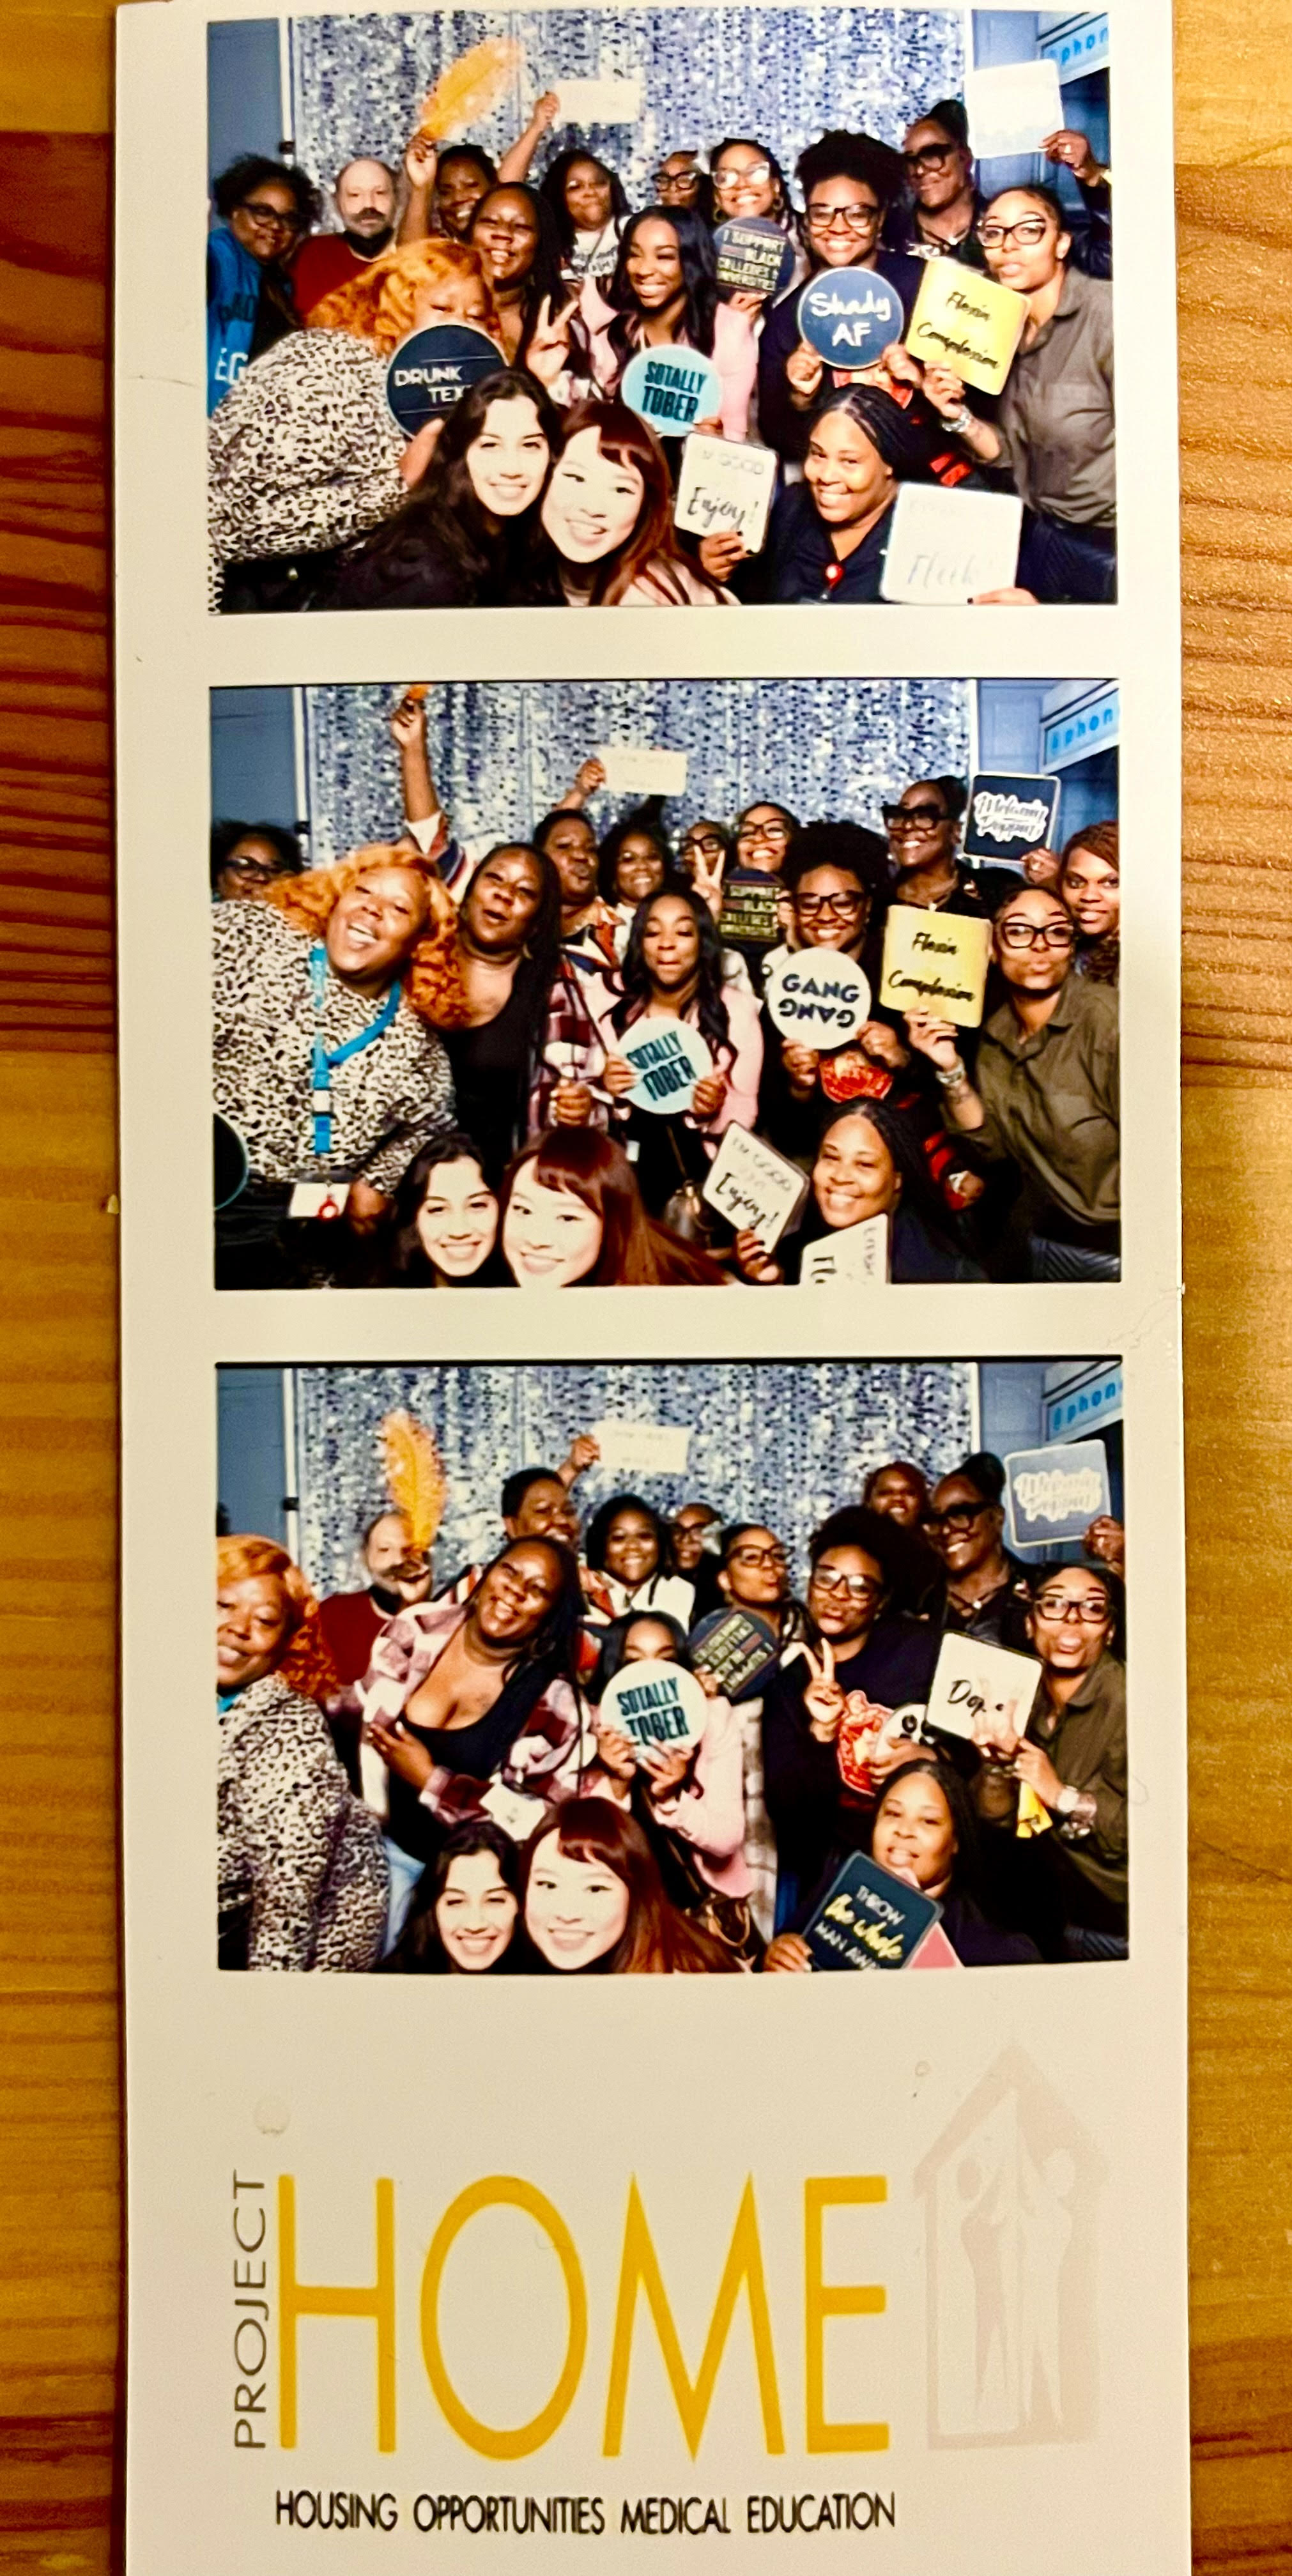 A series of three photos from a photobooth. In each photo there is a large group of people smiling and holding signs. The bottom of the series of photos says "Project Home Housing Opportunities Medical Education"